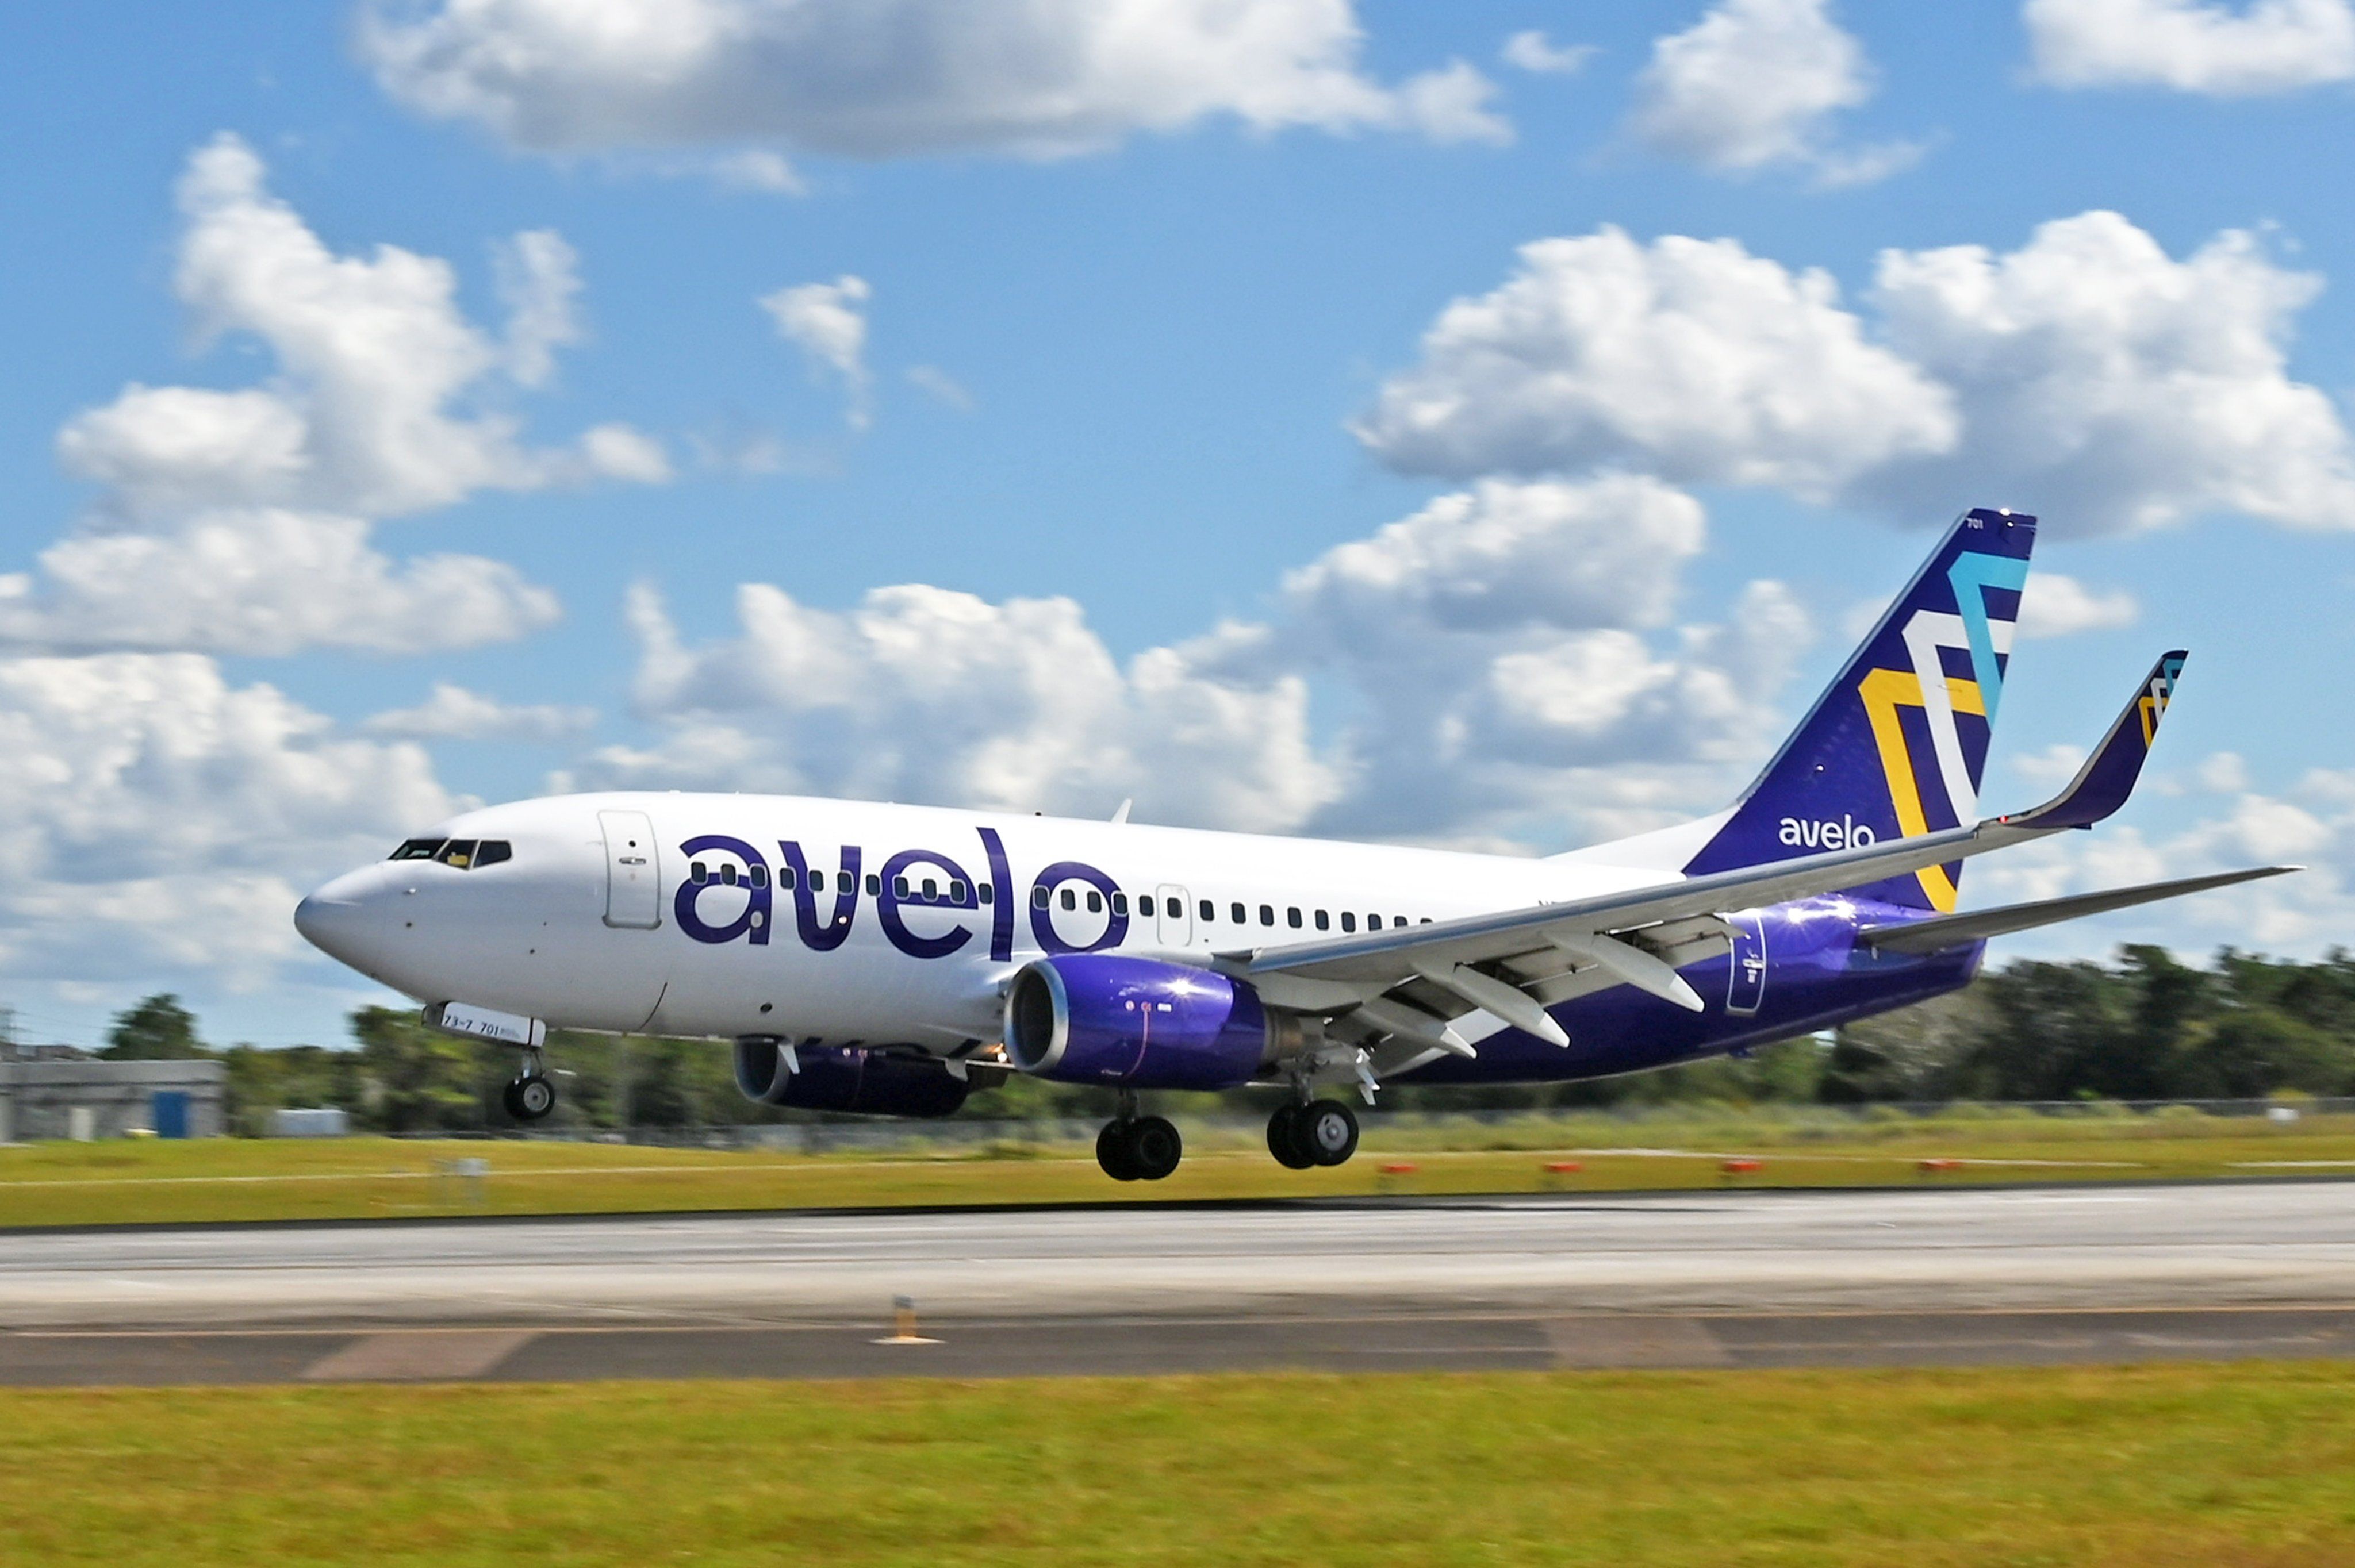 An Avelo Boeing 737-700 about to land.